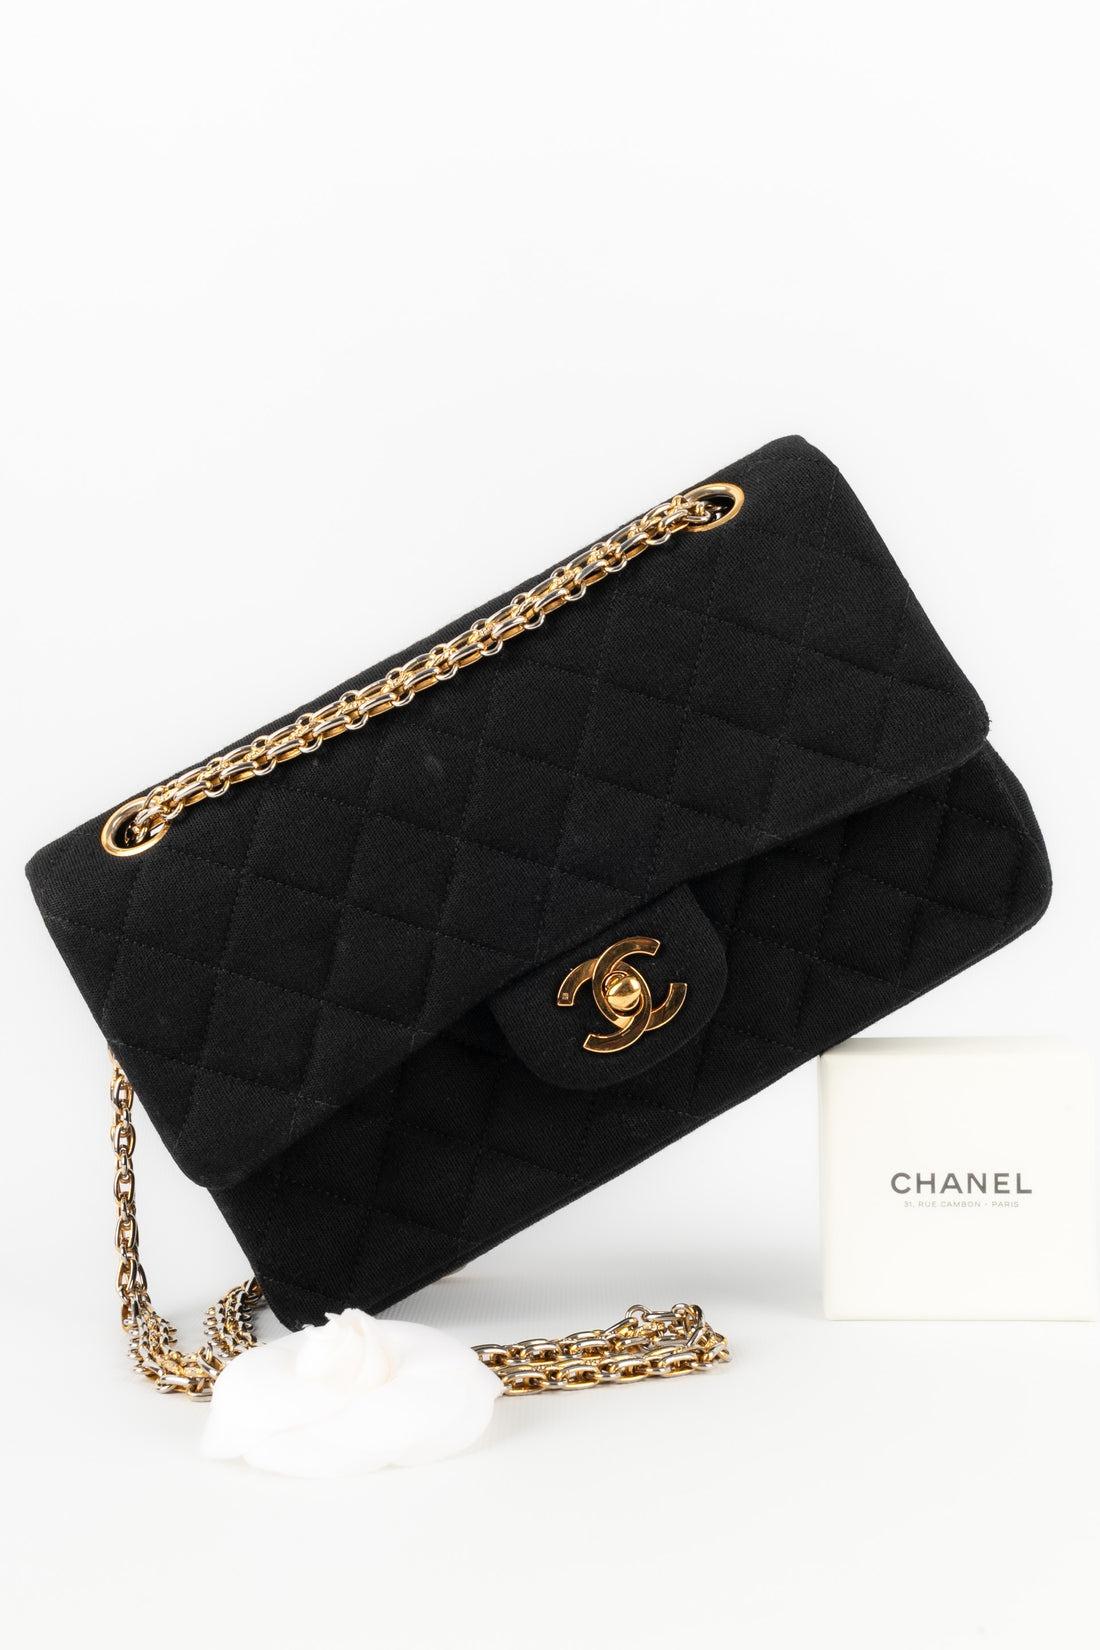 Chanel - Quilted black fabric Timeless bag with golden metal elements. Serial number. 1991/1994 Collection. To be noted, a few stains inside.

Additional information:
Condition: Very good condition
Dimensions: Height: 15 cm - Length: 22 cm - Depth: